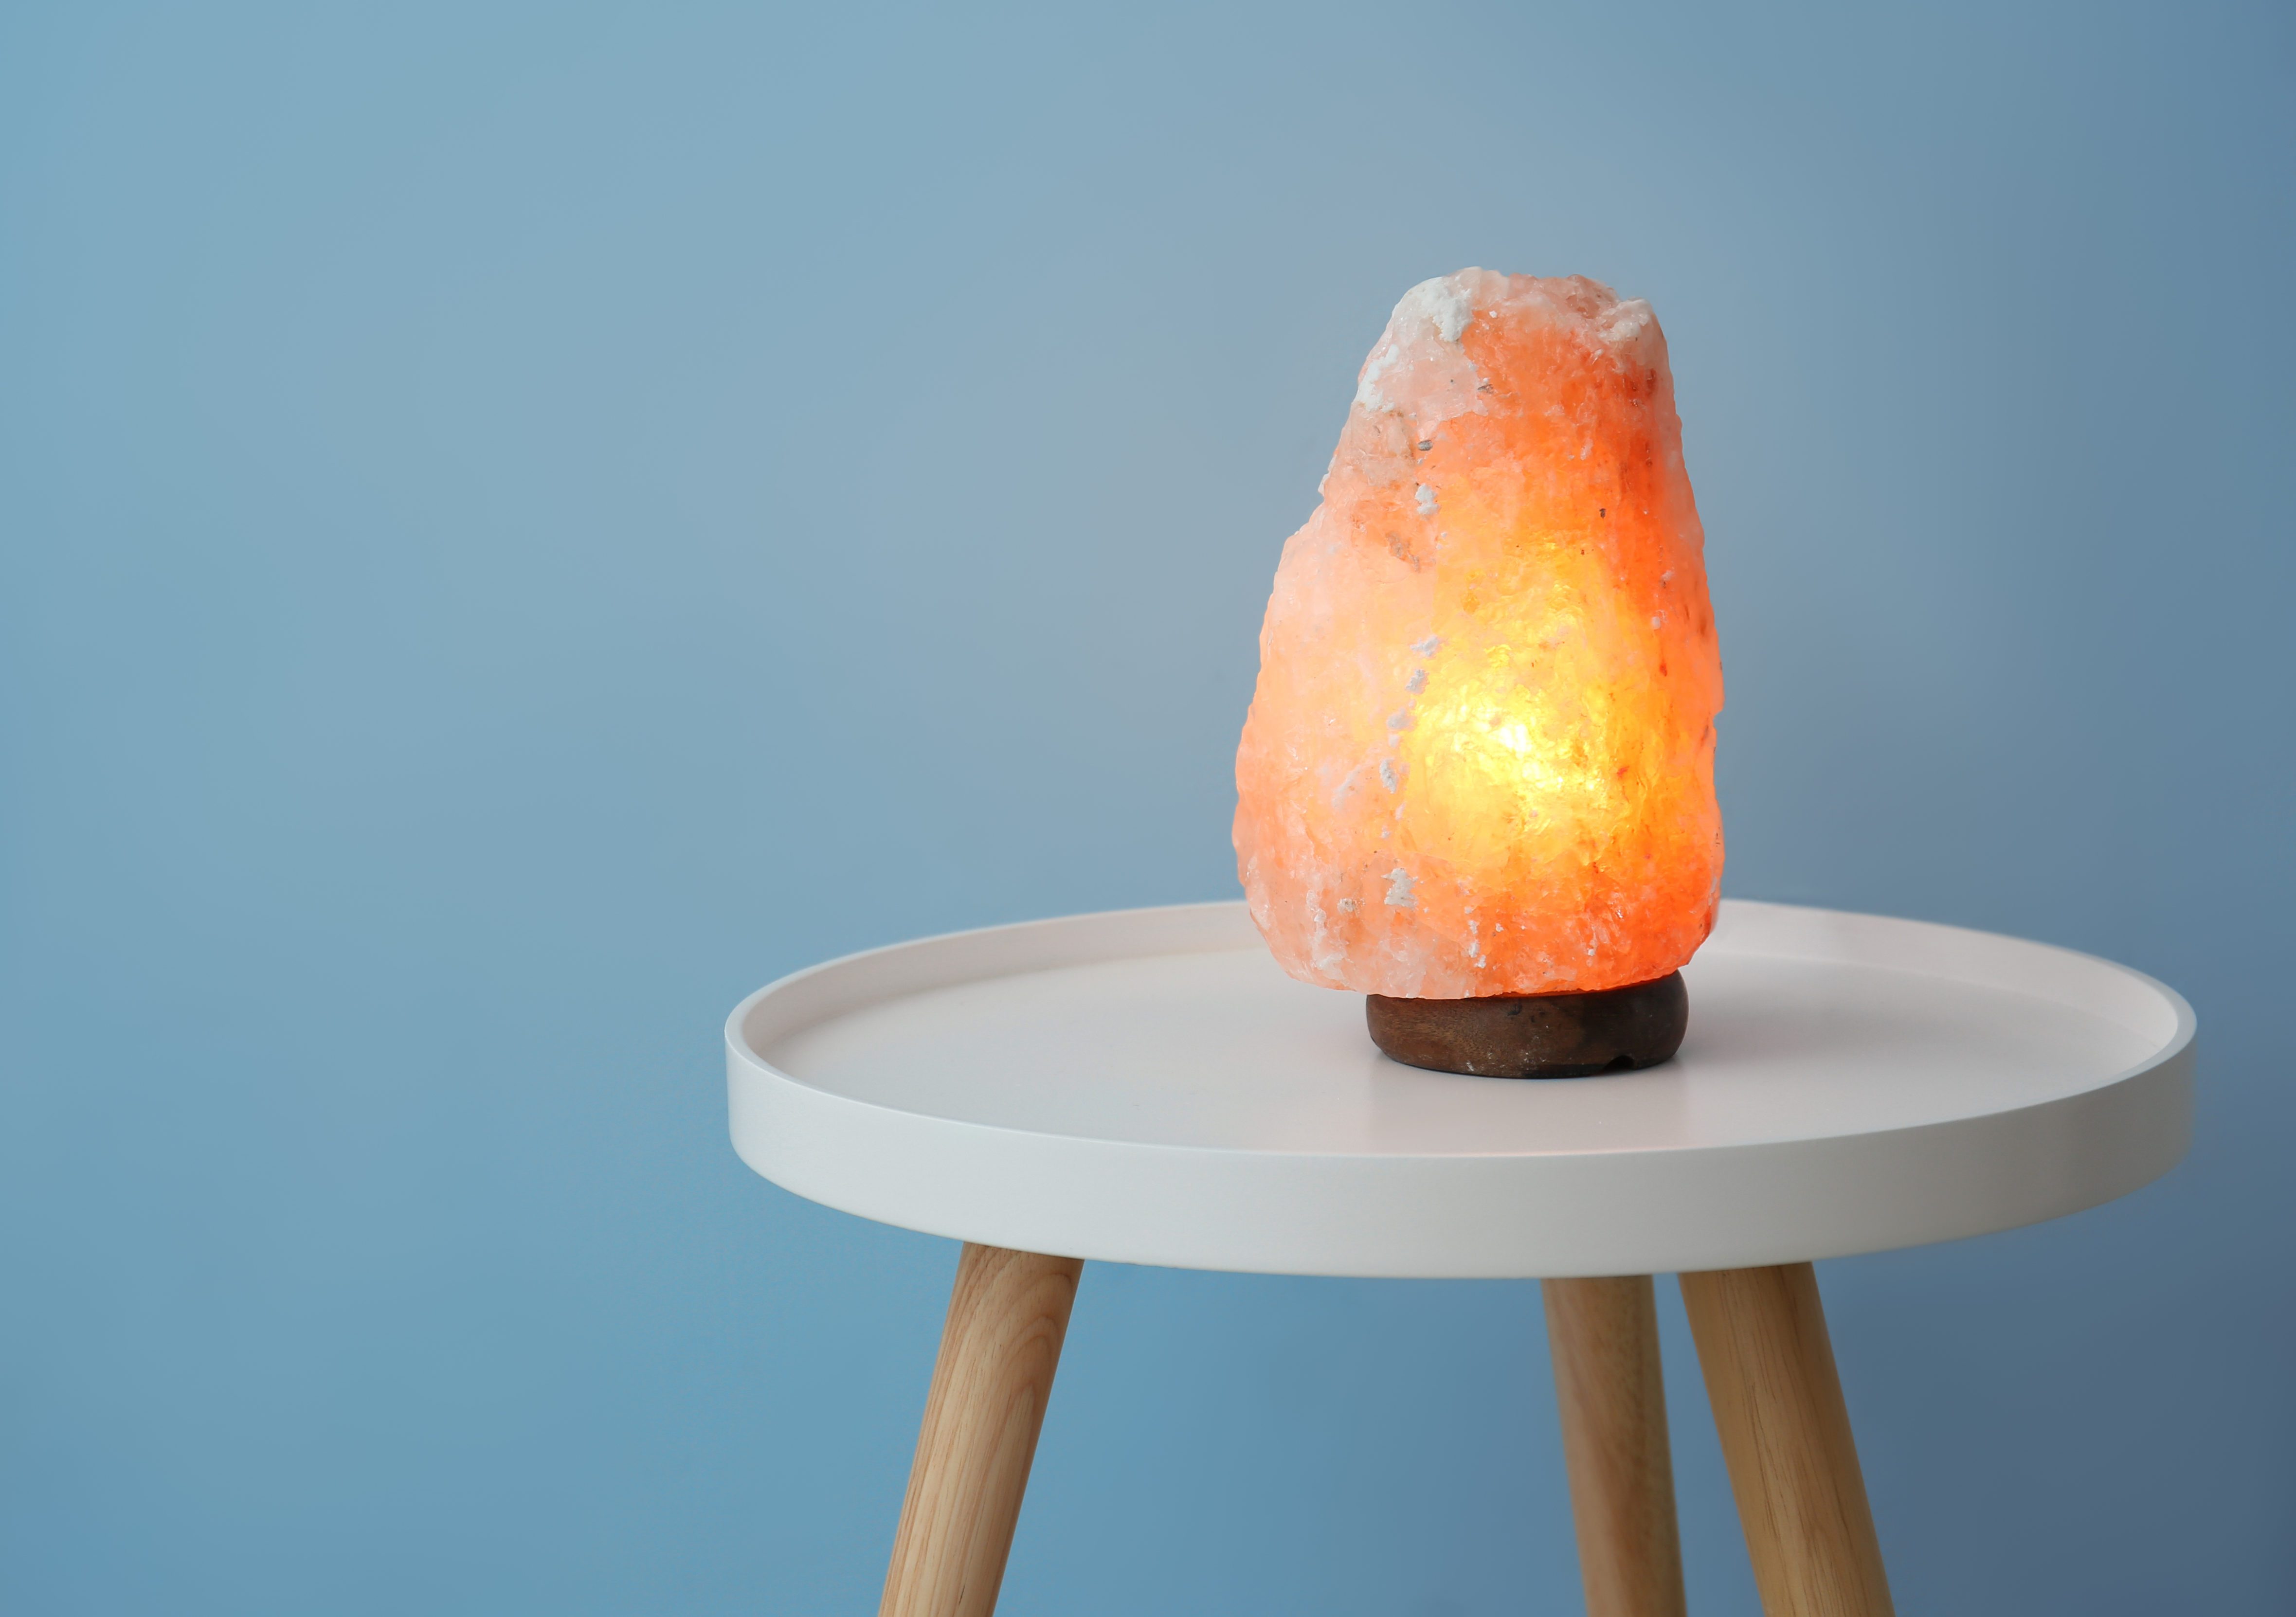 Himalayan salt lamp on table against color background